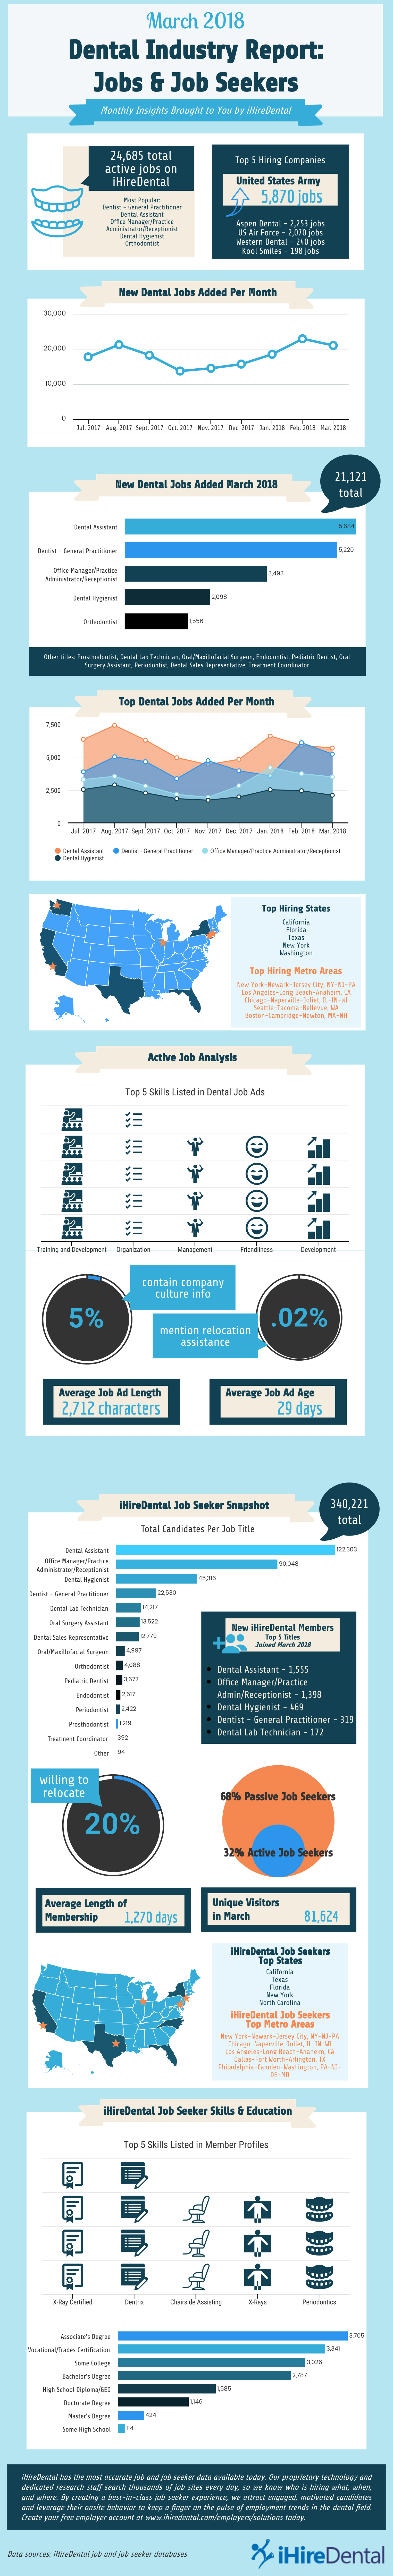 ihiredental march 2018 dental industry report infographic